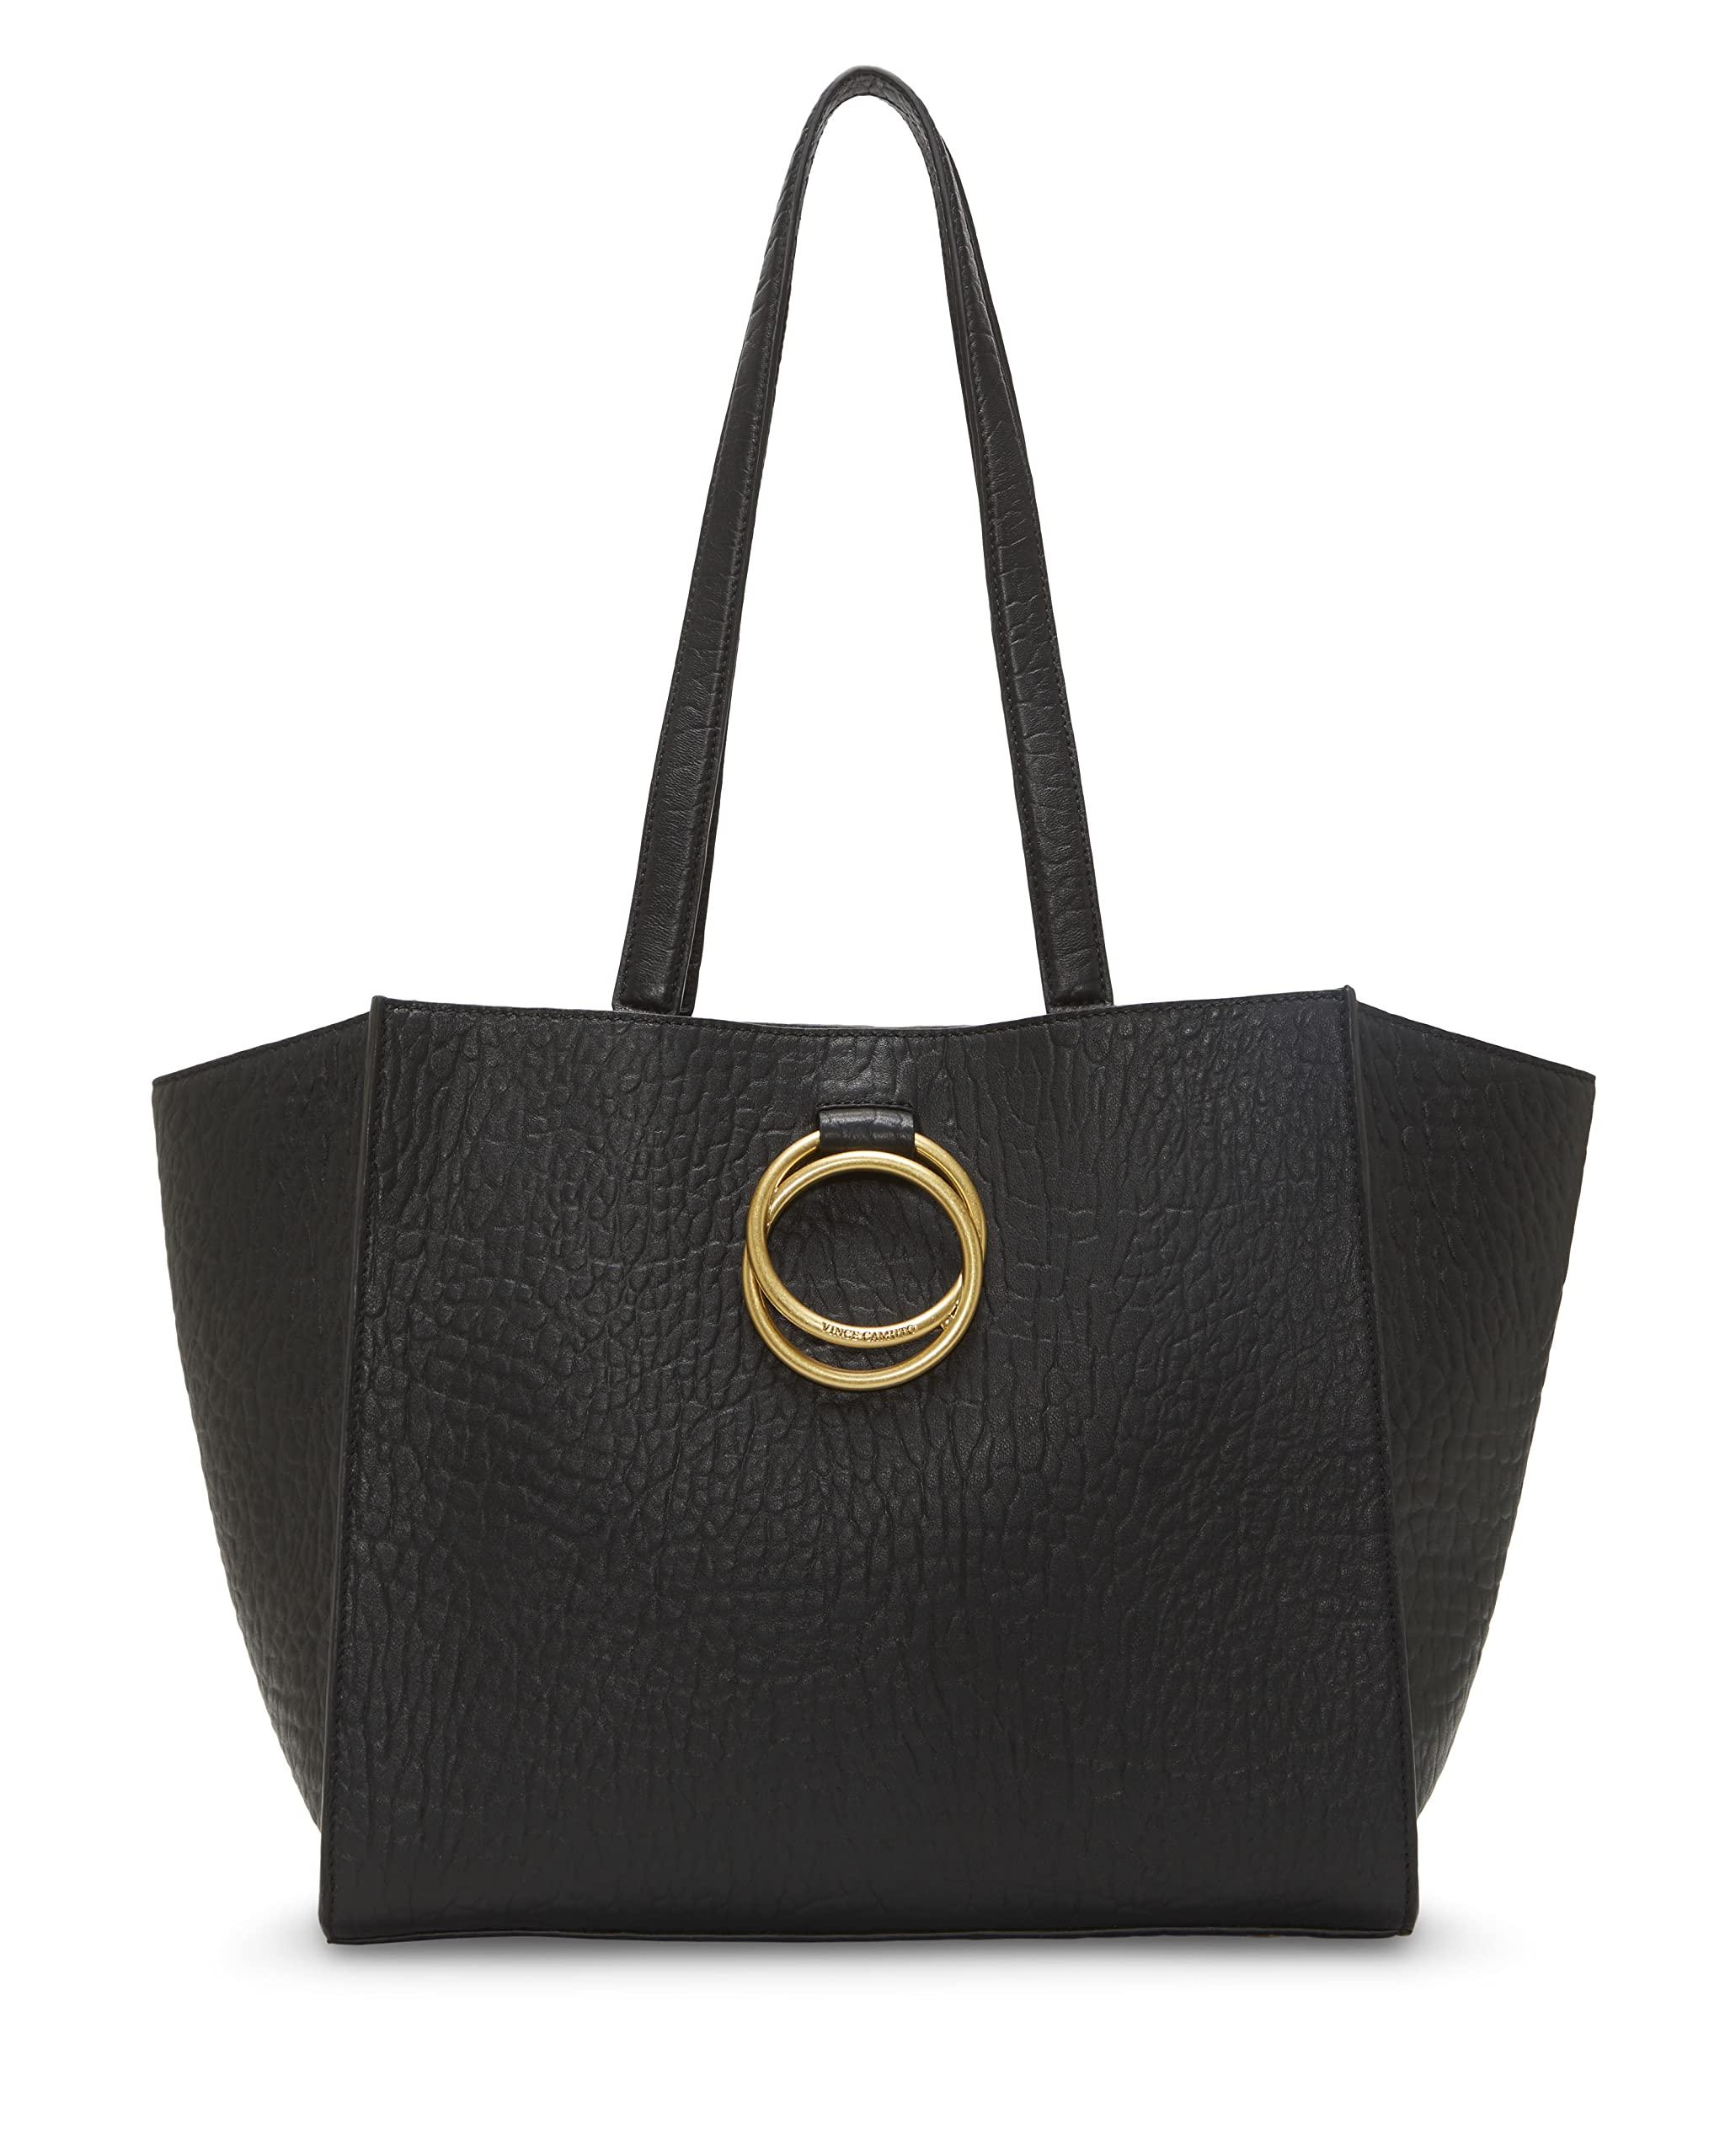 Vince Camuto Livy Tote in Black | Lyst